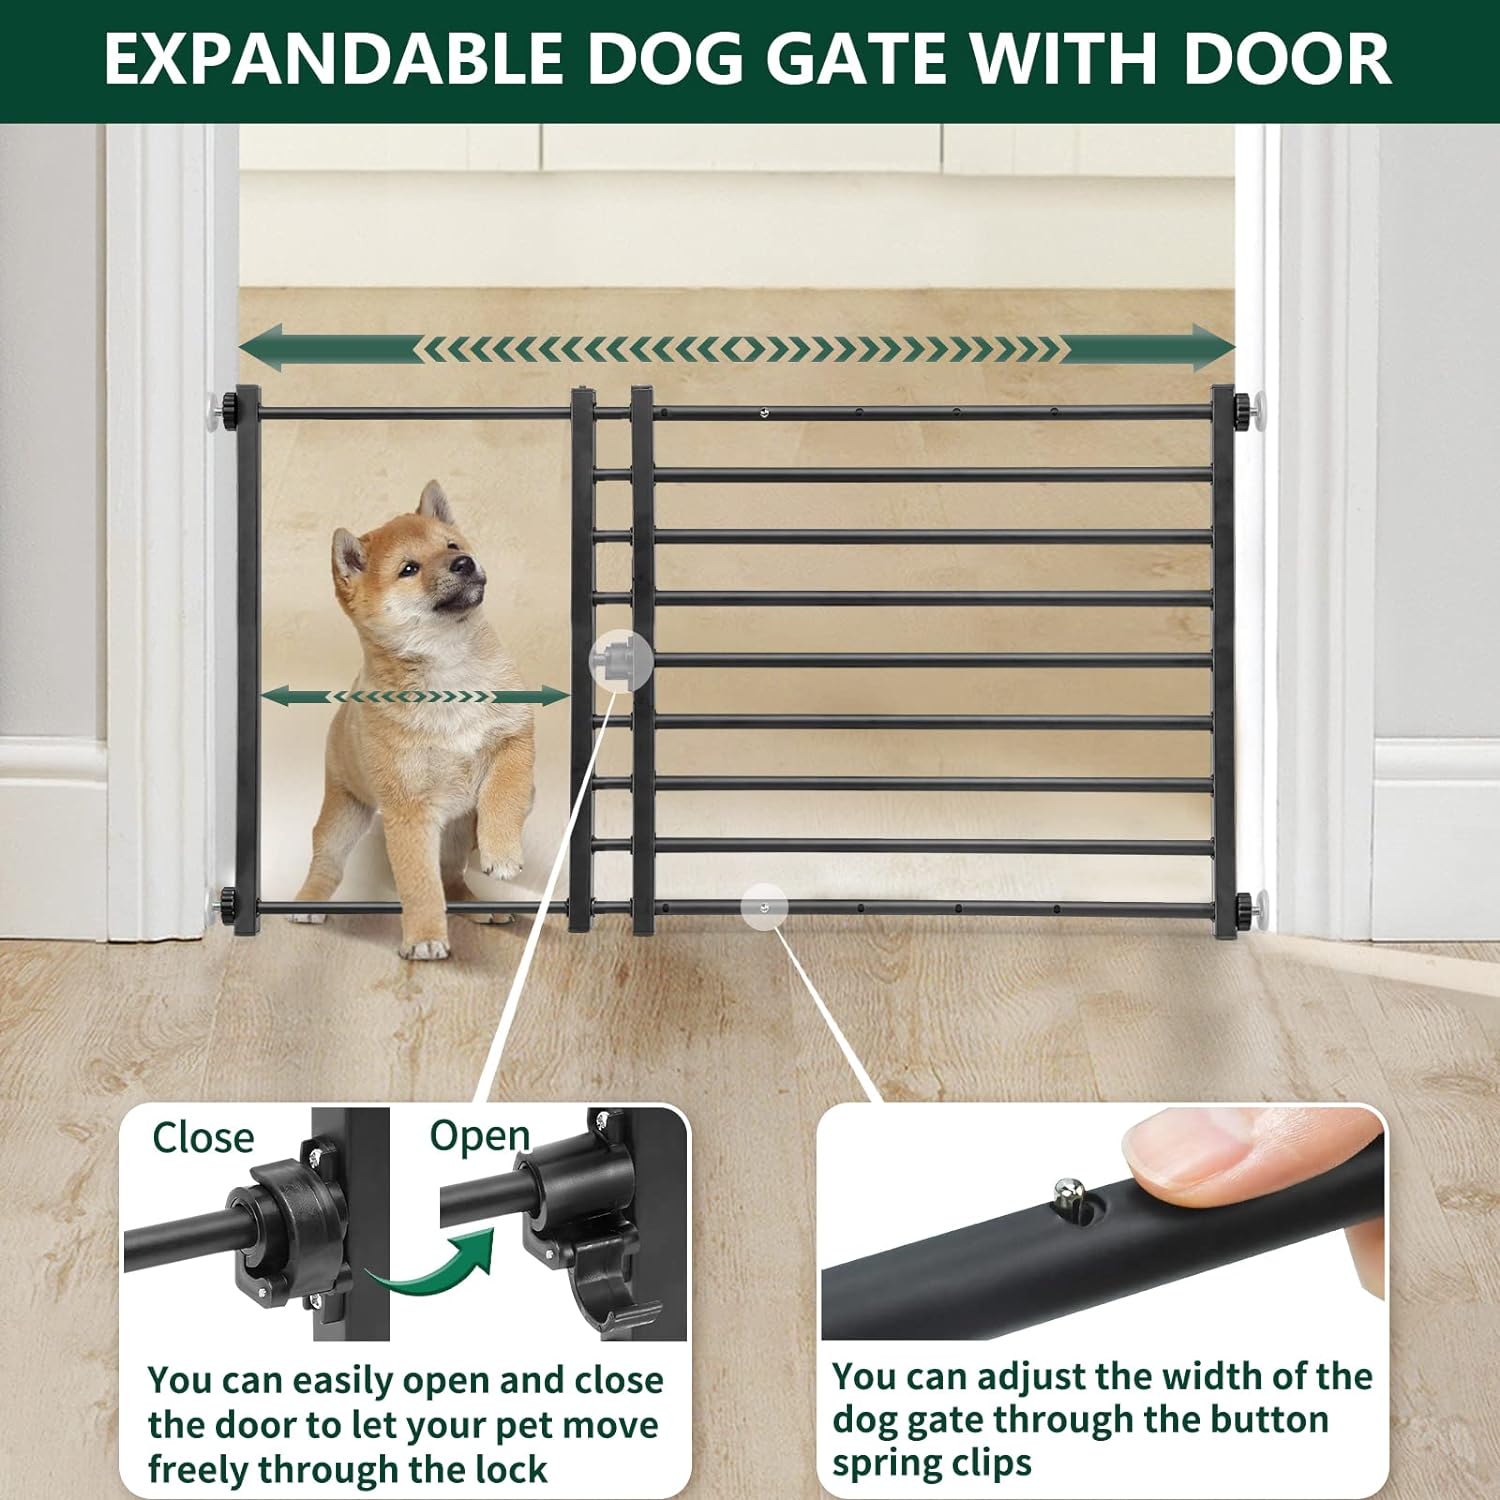 Malier Metal Dog Gate with Door, 26-43 Width Expandable Dog Gate Short Pet Gate for Stairs and Doorways, Pressure Mount Easily Step Over Indoor Dog Gates Puppy Gate for Small Dogs Puppy (L, White)